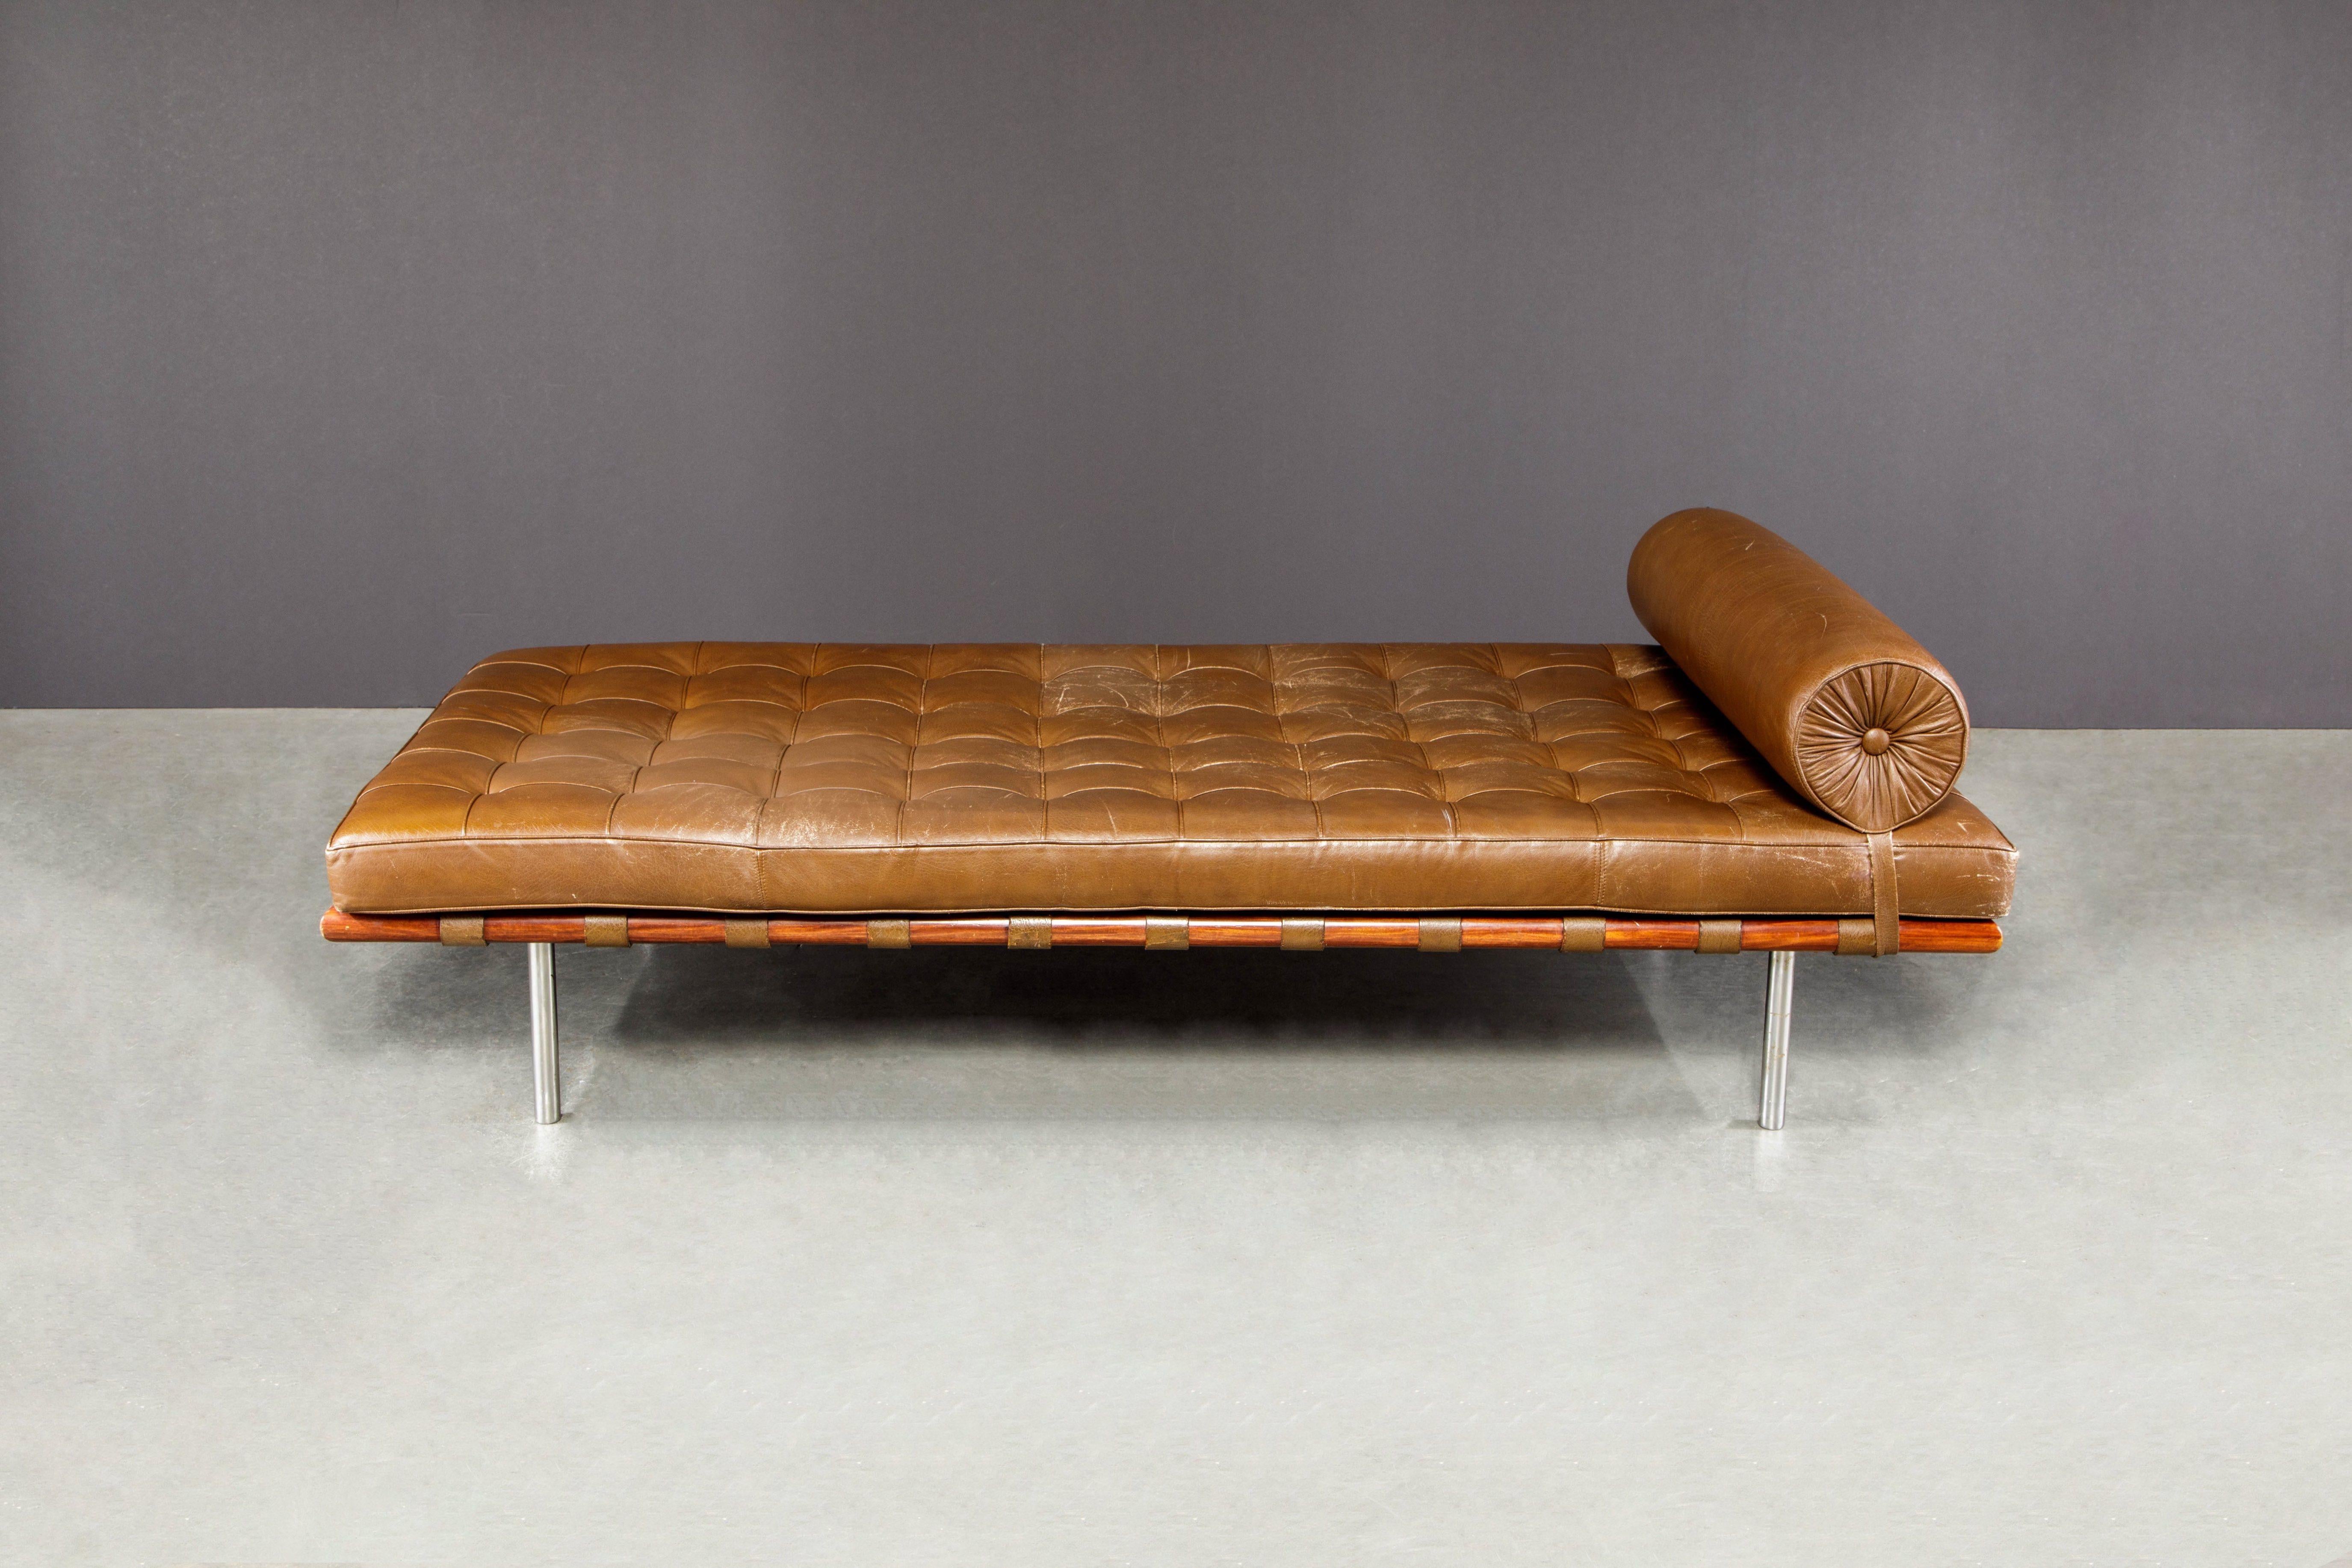 This iconic and authentic (both the leather cushion and the Mahogany frame is signed with Knoll International labels) daybed is the 'Barcelona Daybed' also referred to as the 'Barcelona Couch' by Ludwig Mies van der Rohe for Knoll International and